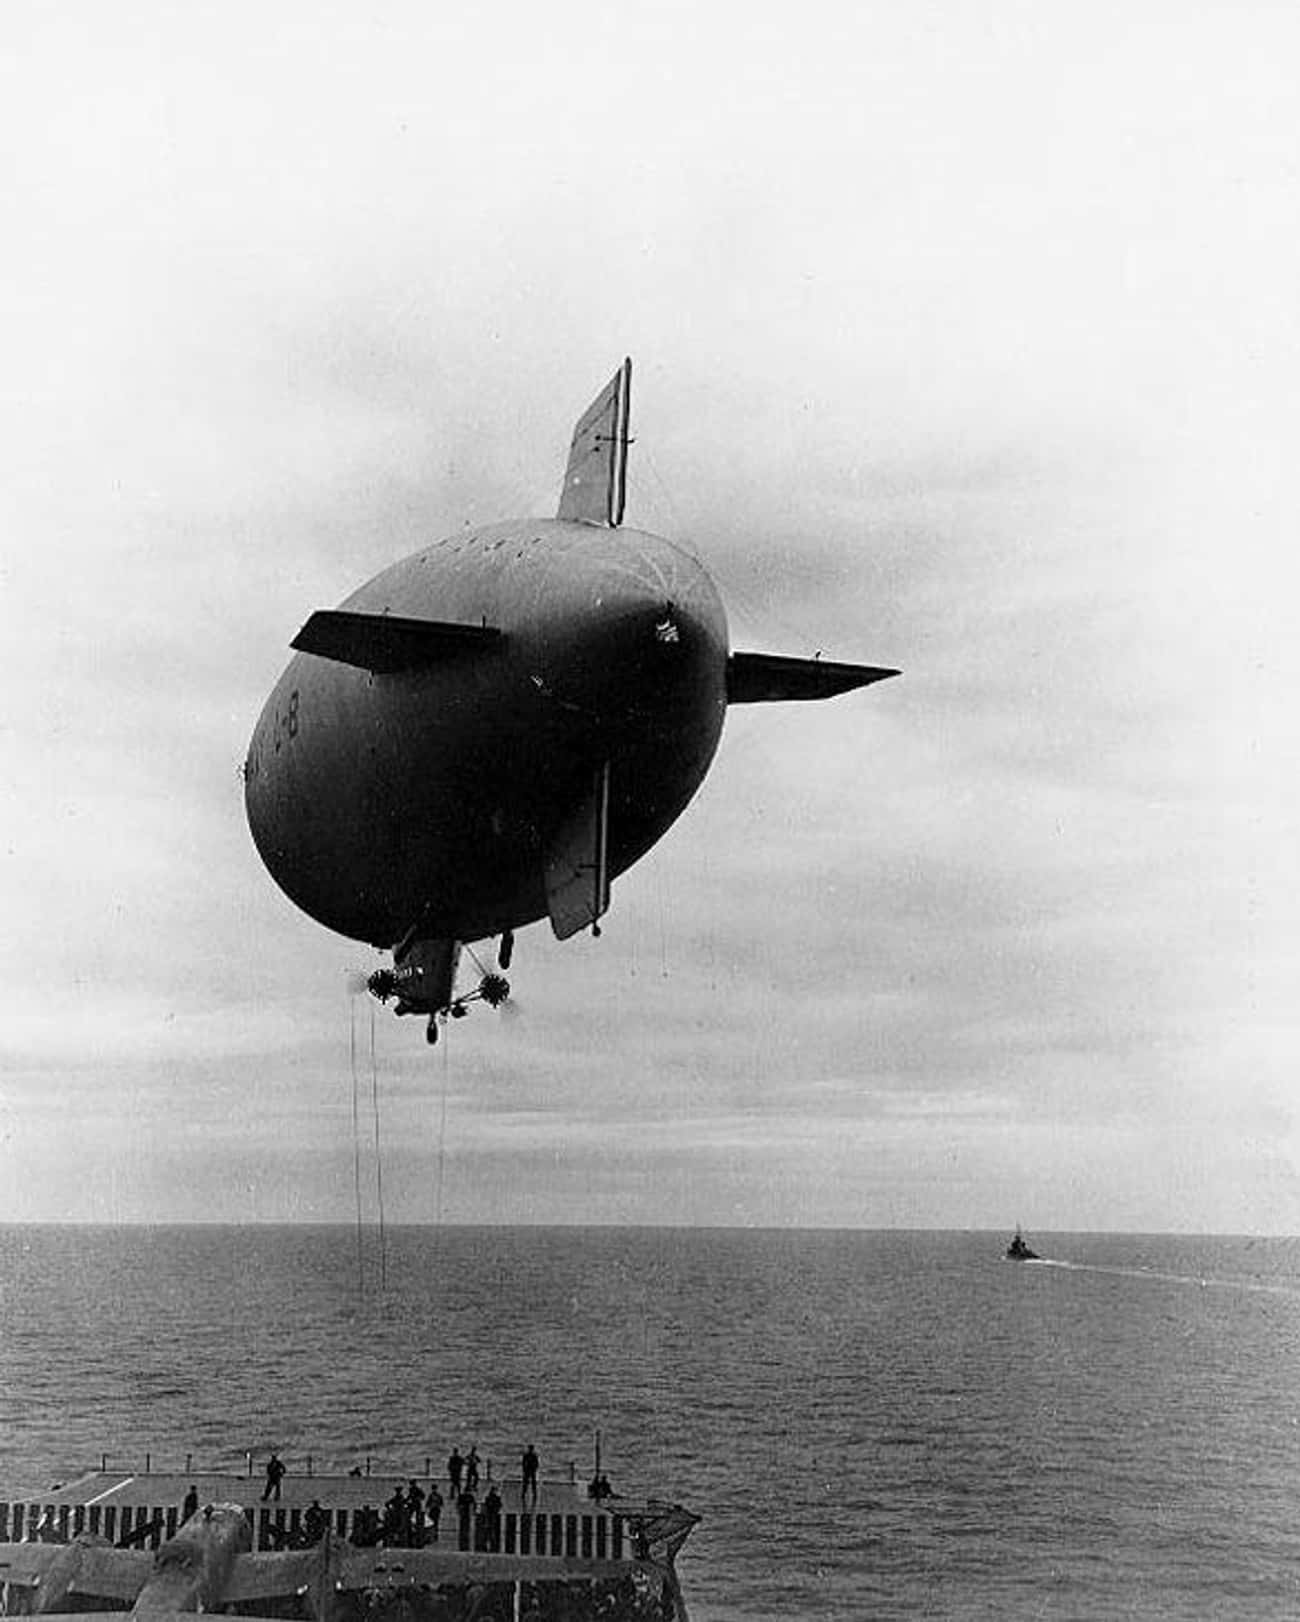 The Mystery Of The L-8 Blimp